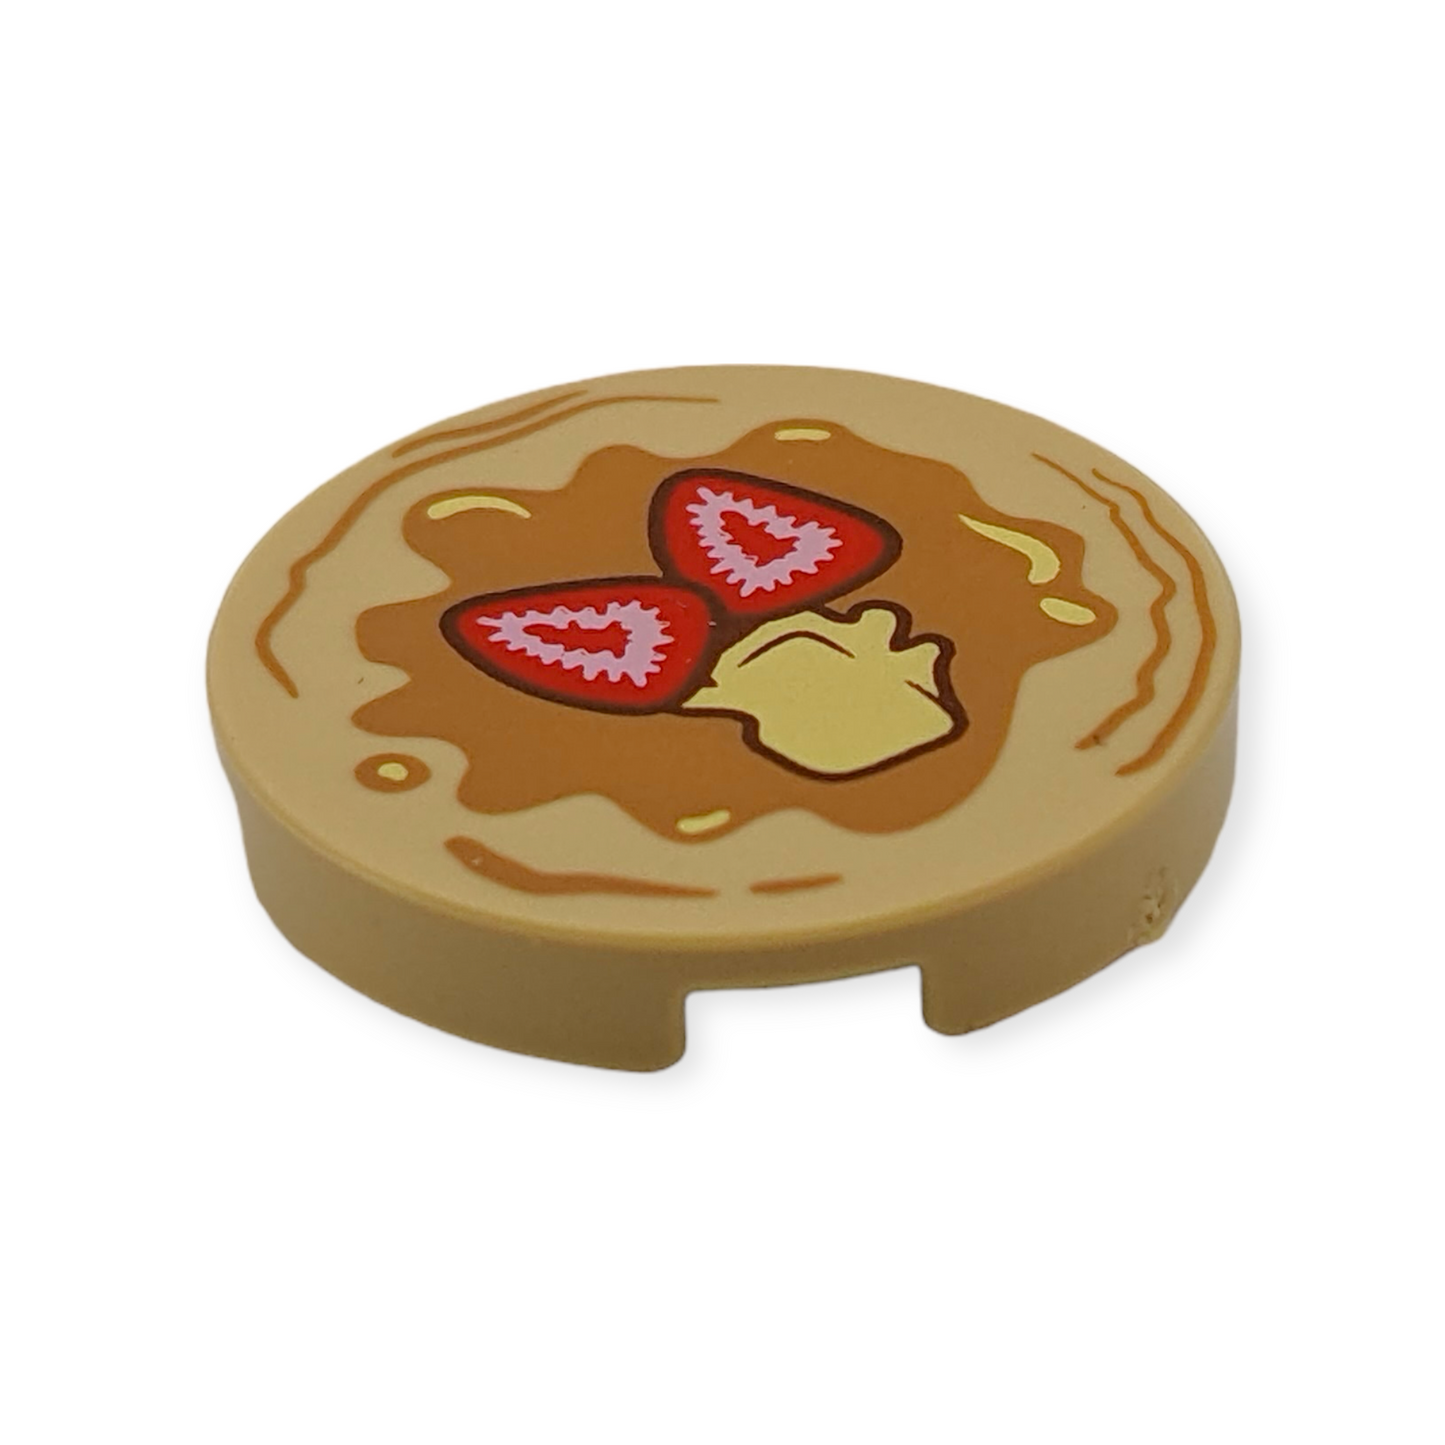 LEGO Tile 2x2 Round - Pancake with Strawberries and Butter